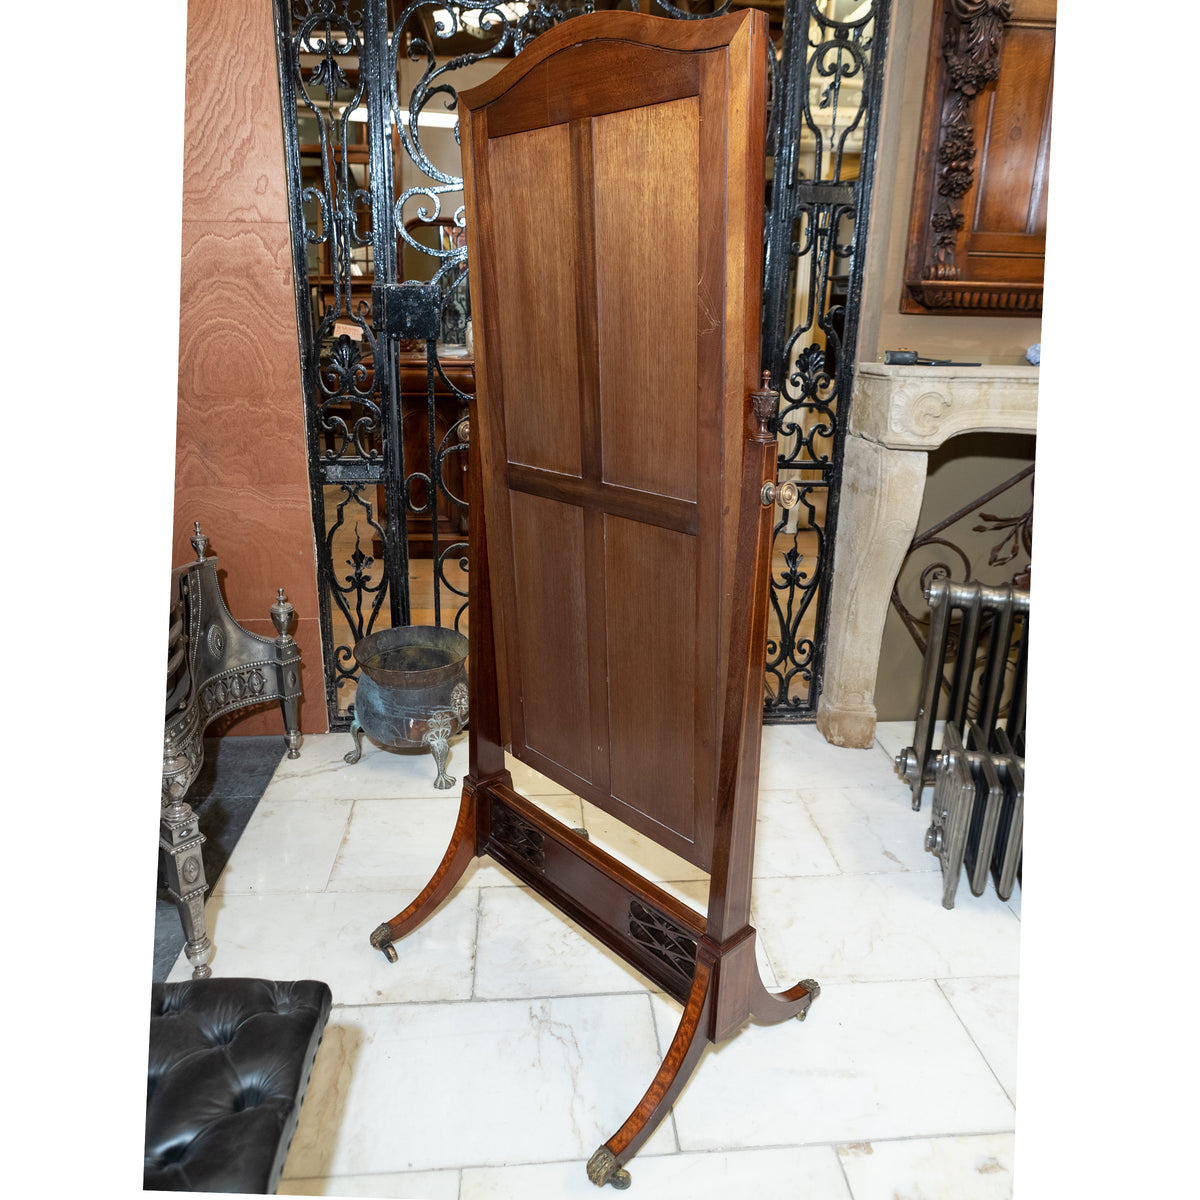 Antique Full Length Inlaid Mahogany Cheval Mirror | The Architectural Forum